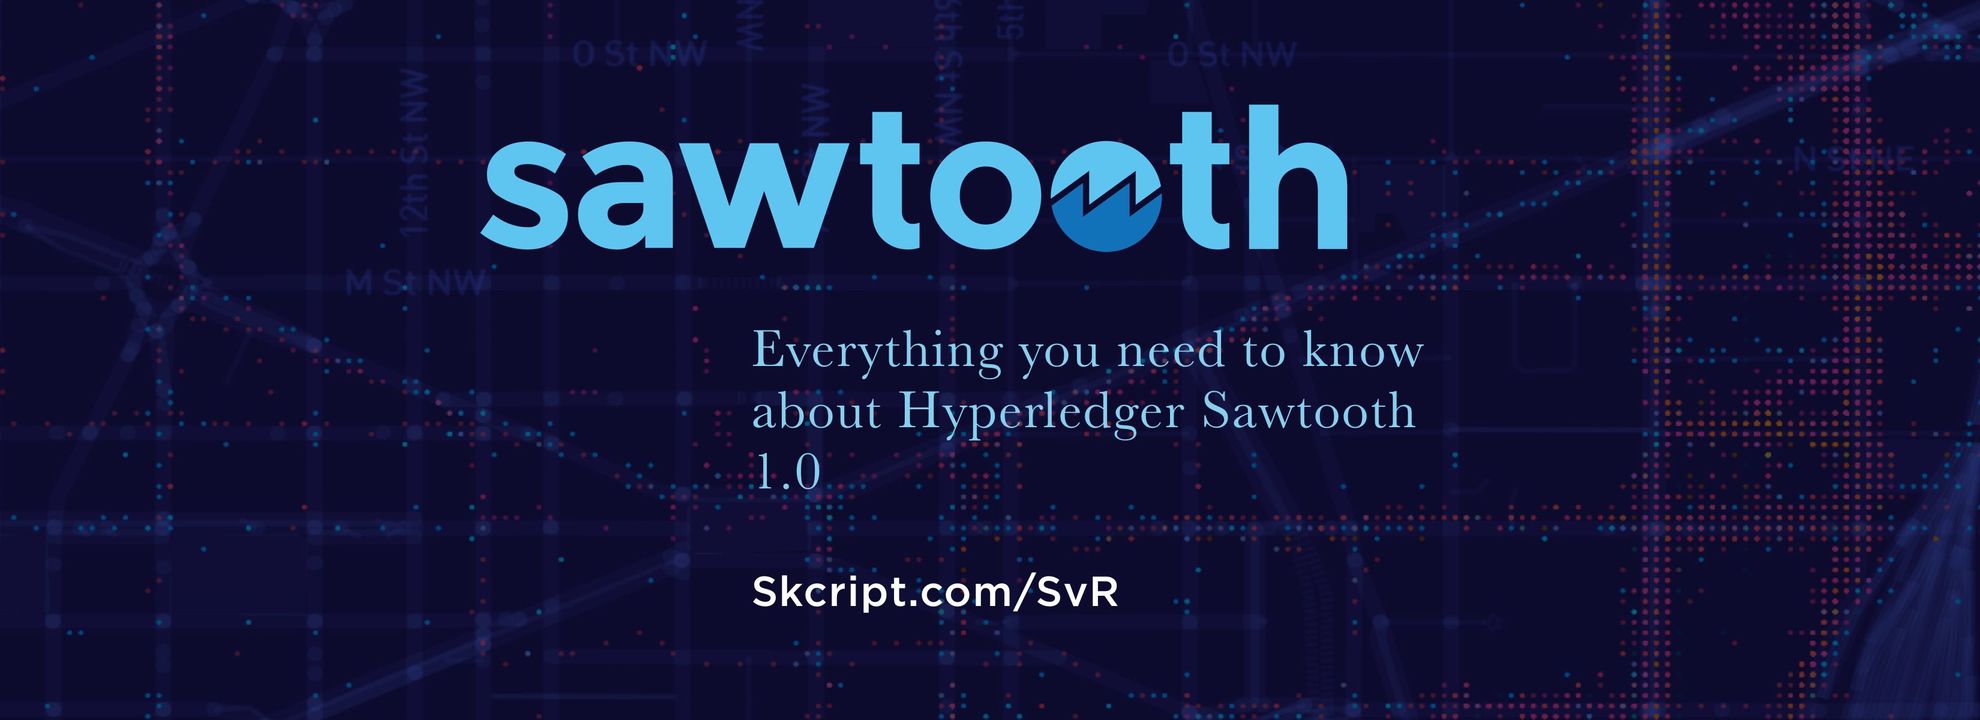 Everything you need to know about Hyperledger Sawtooth 1.0